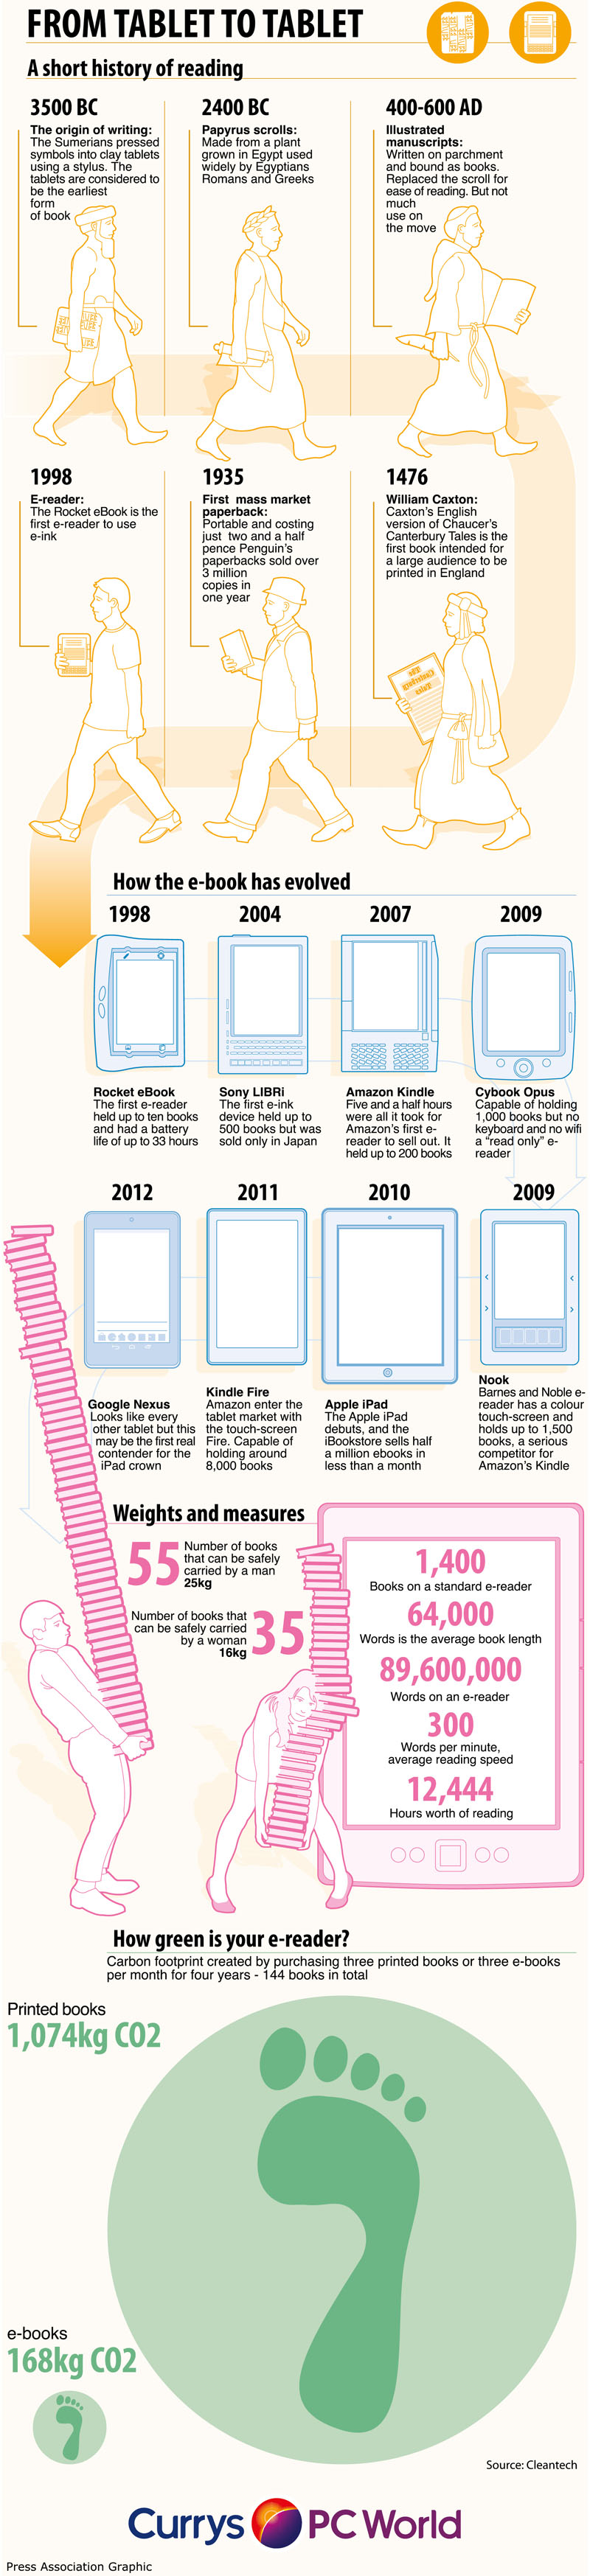 history of reading, from tablet to tablet